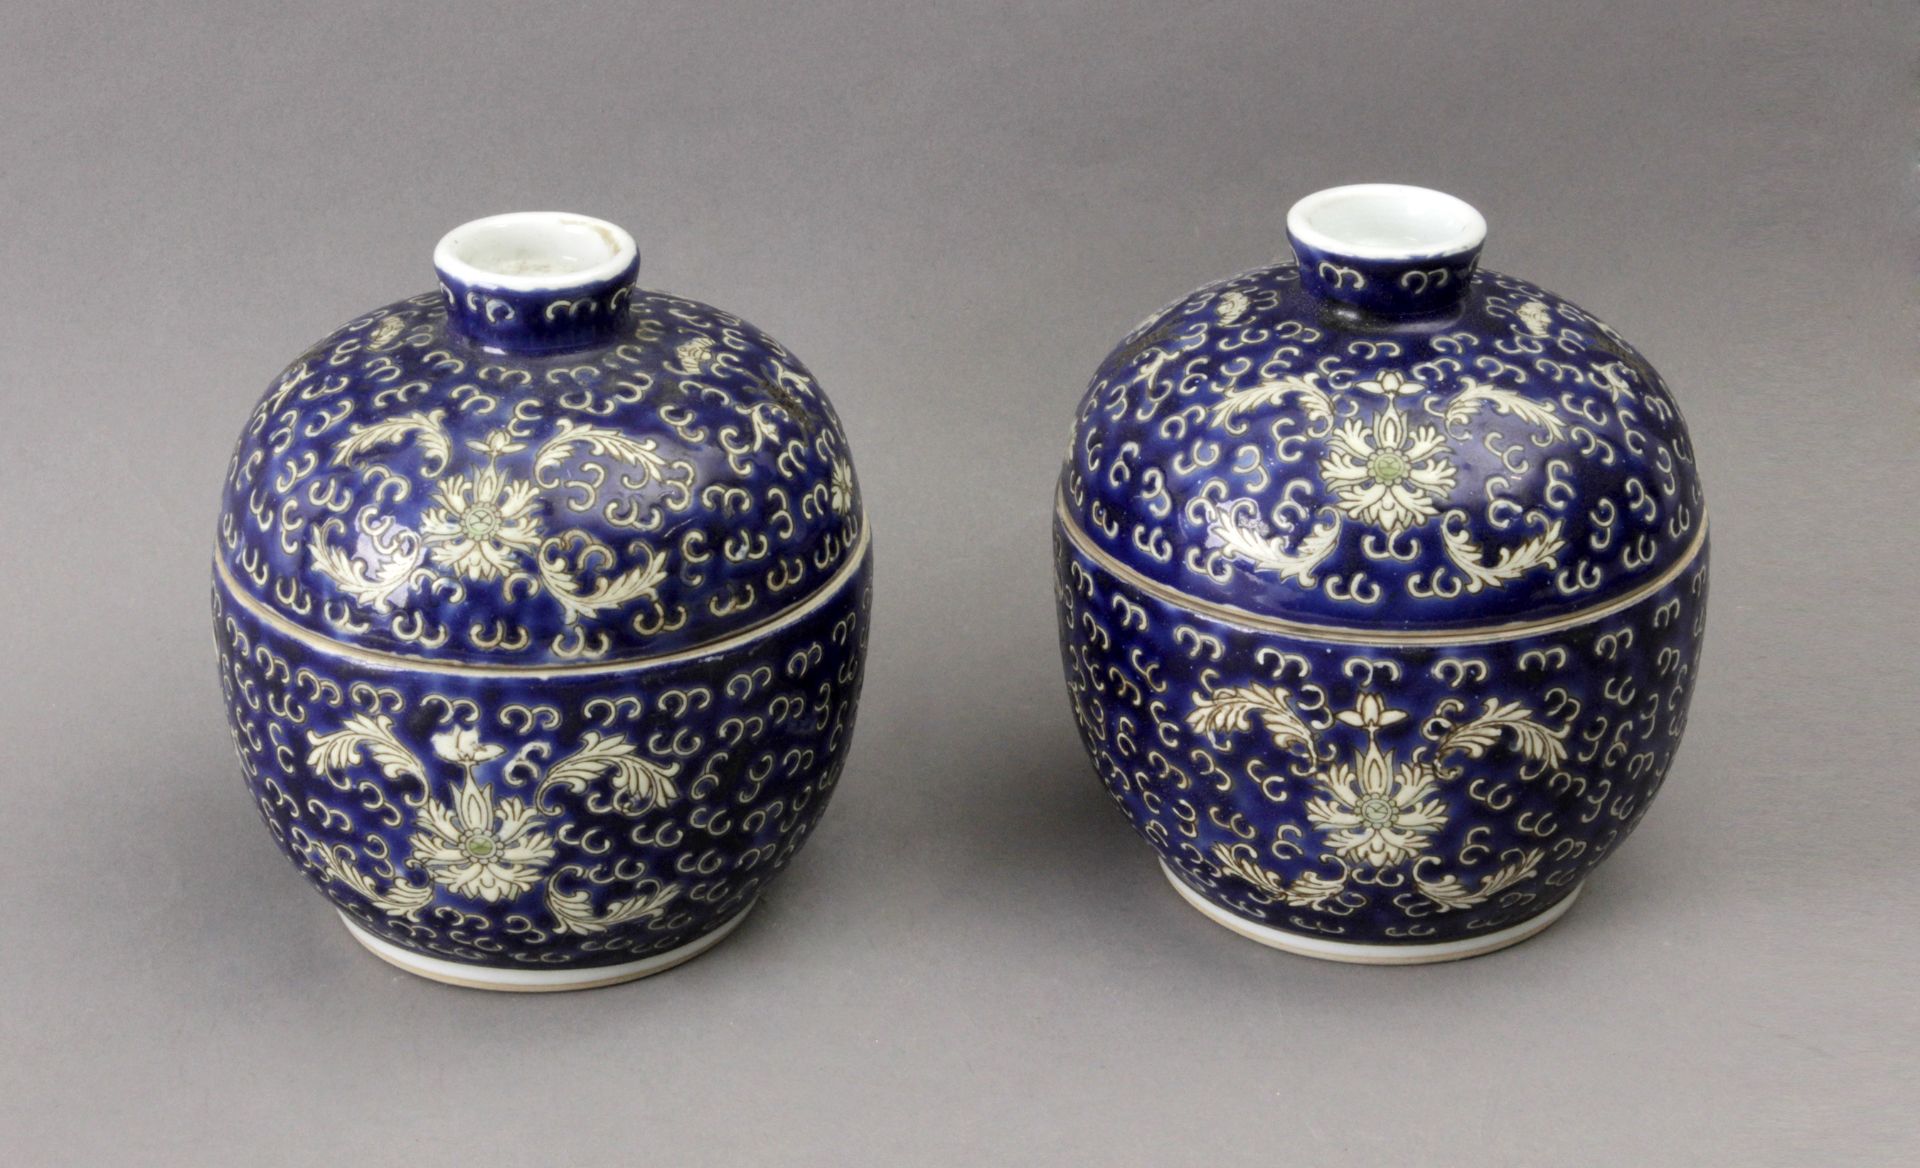 A pair of 20th century Chinese porcelain tea cups